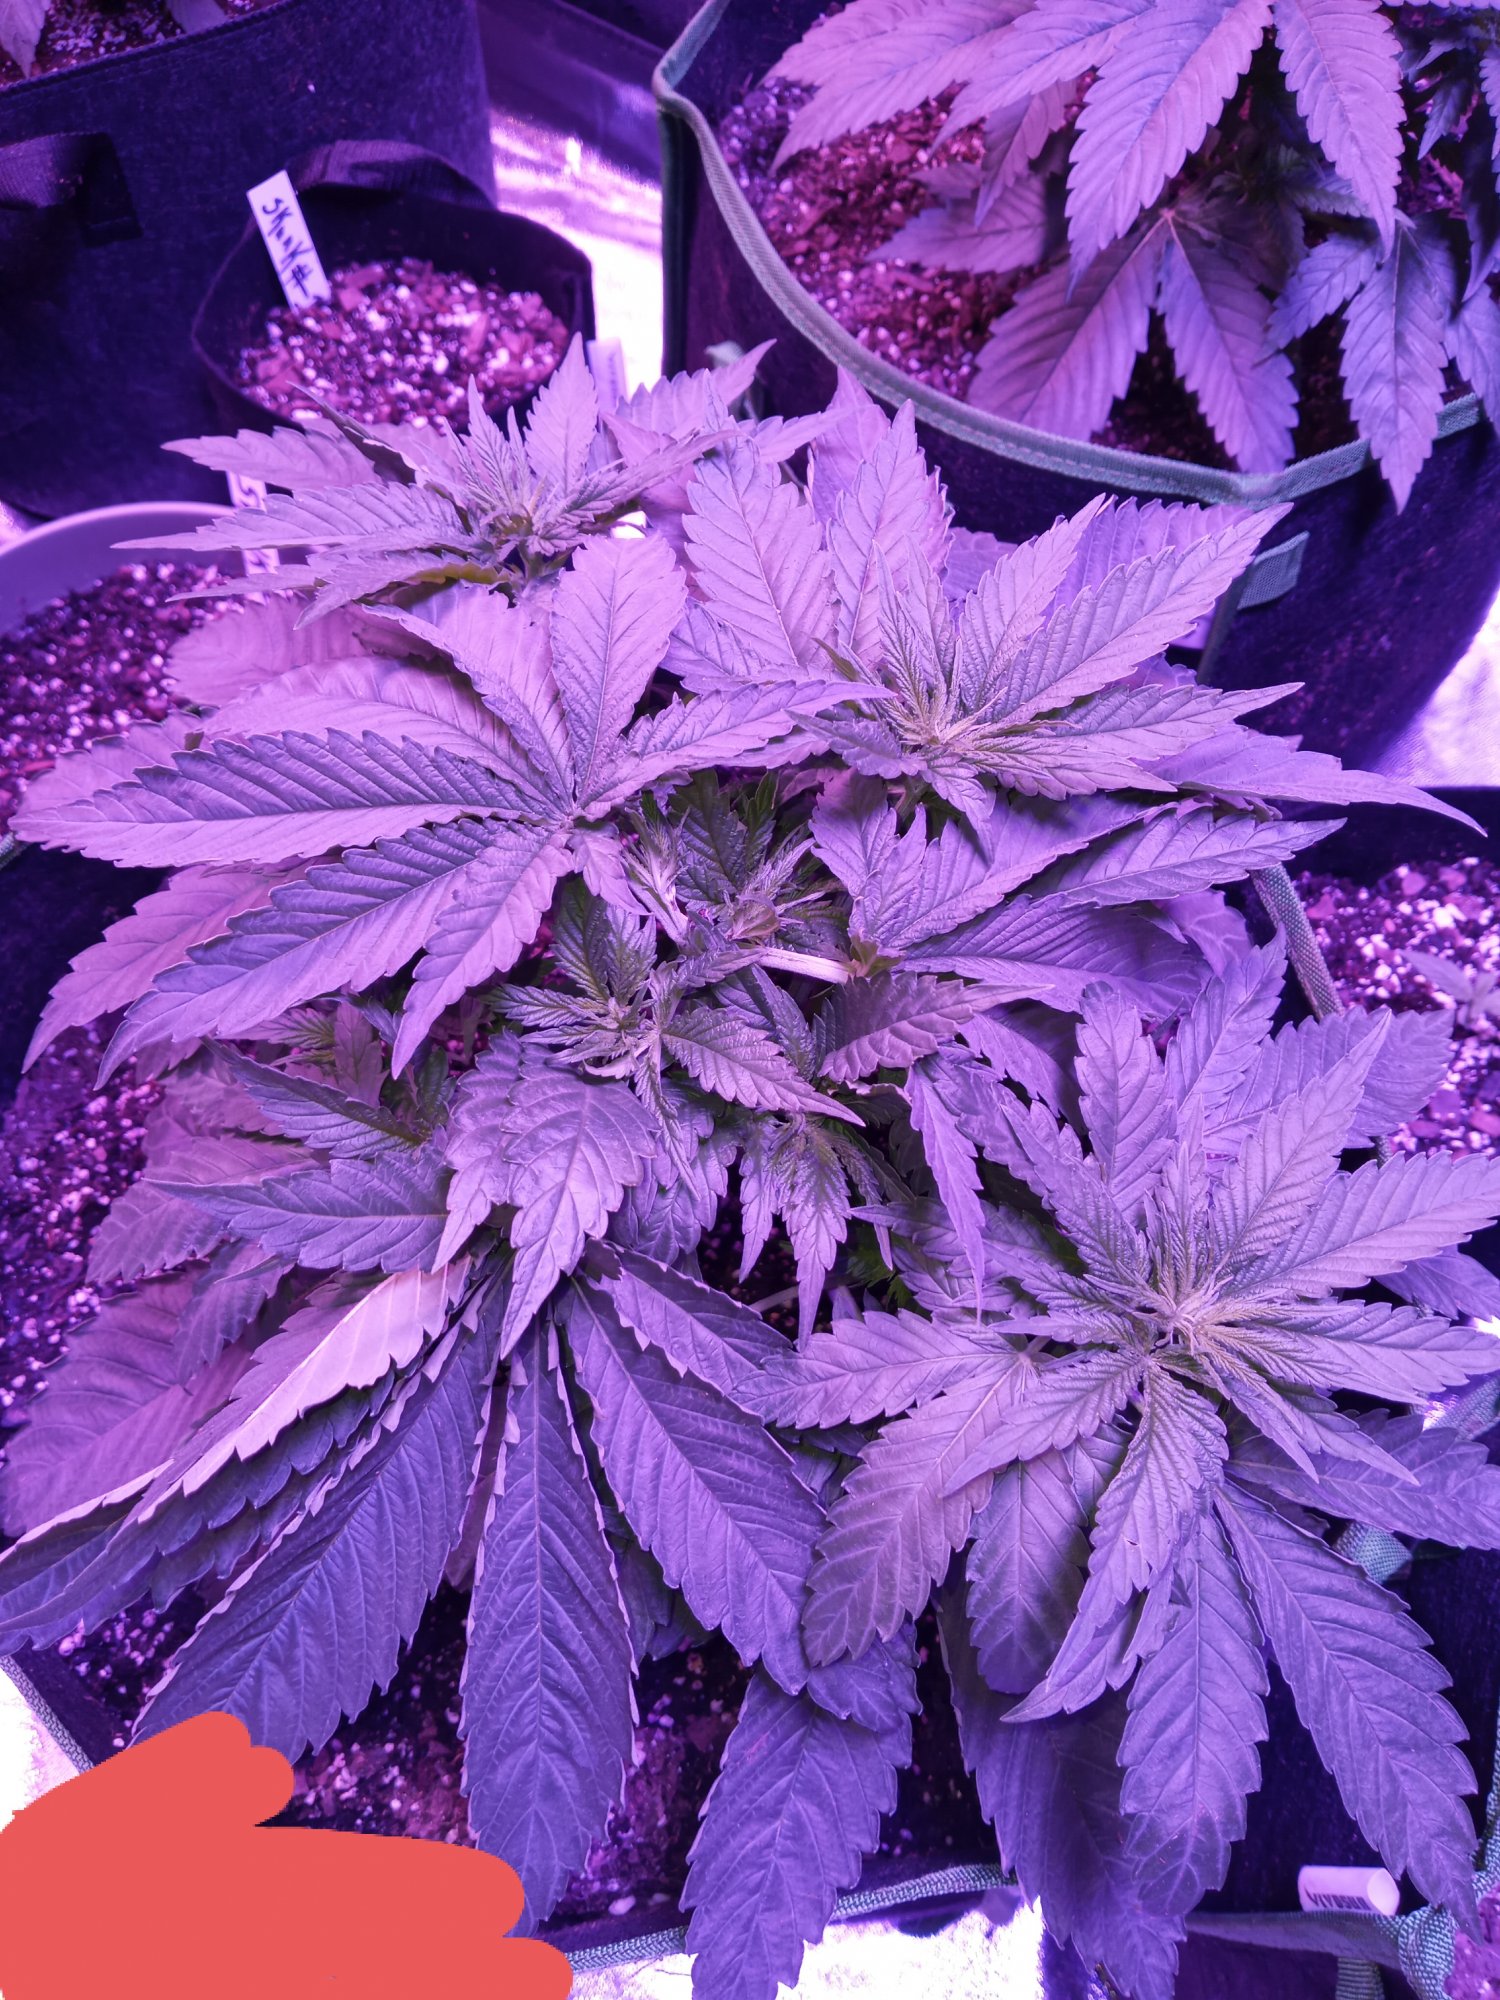 Pruning above 6th node did i hurt her